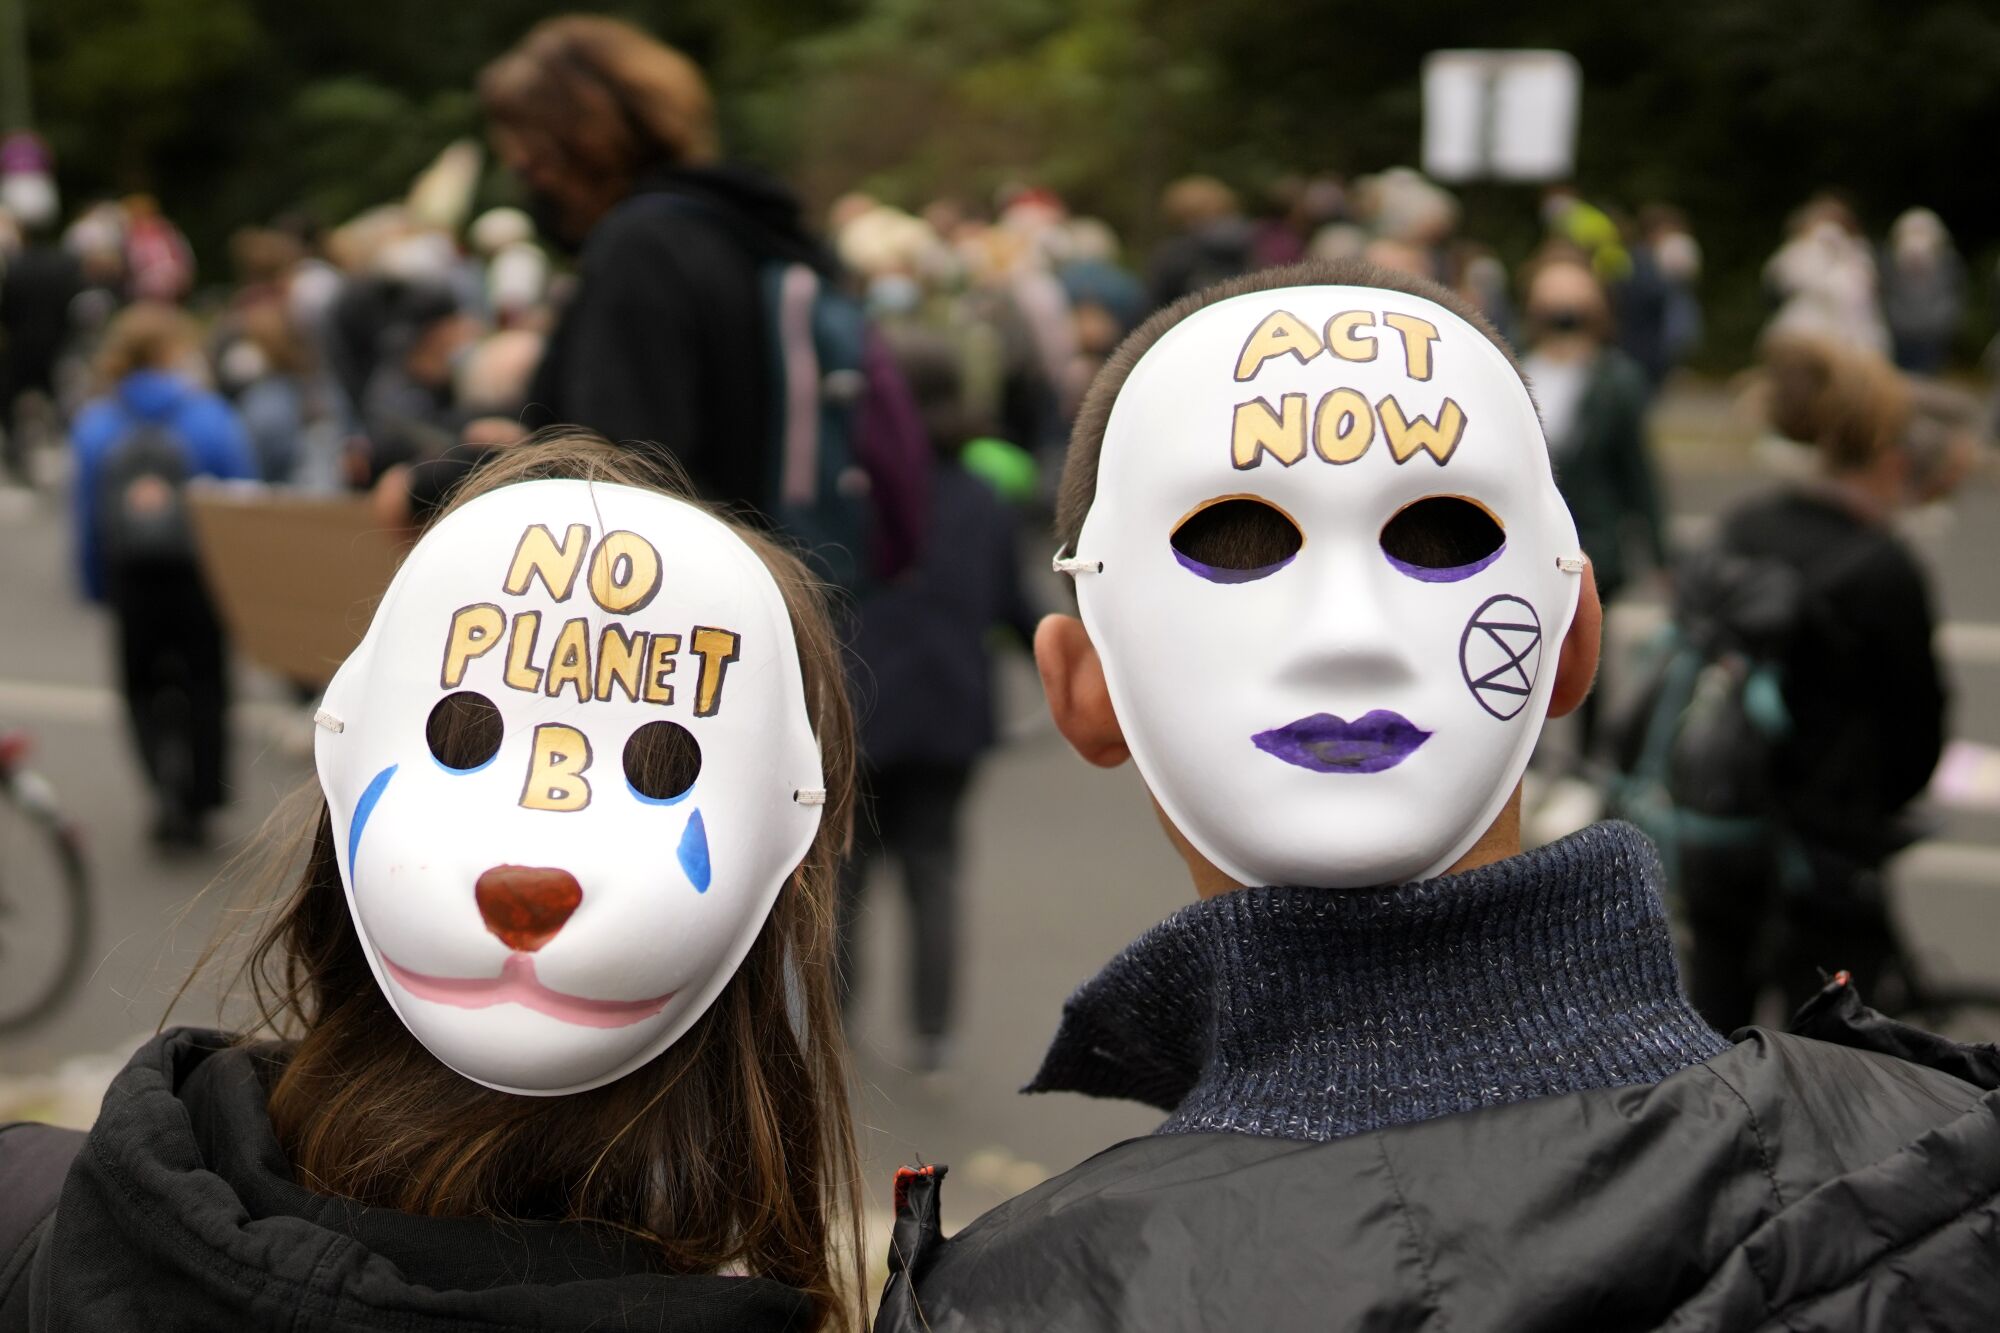 Masks at a rally read "No planet B" and "Act now."